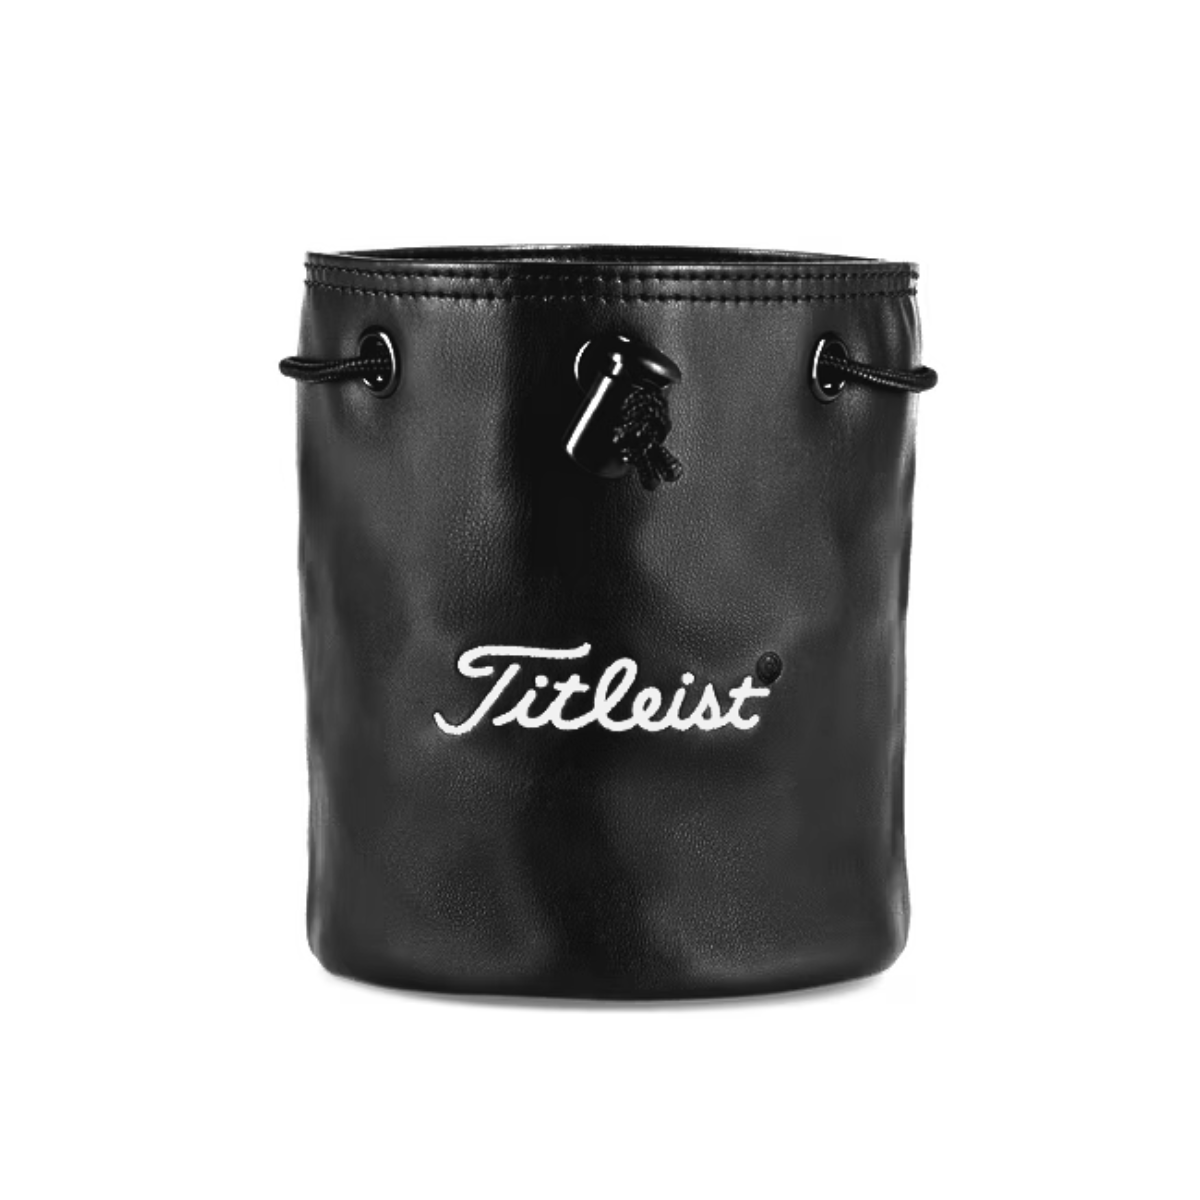 Titleist Professional Valuables Pouch